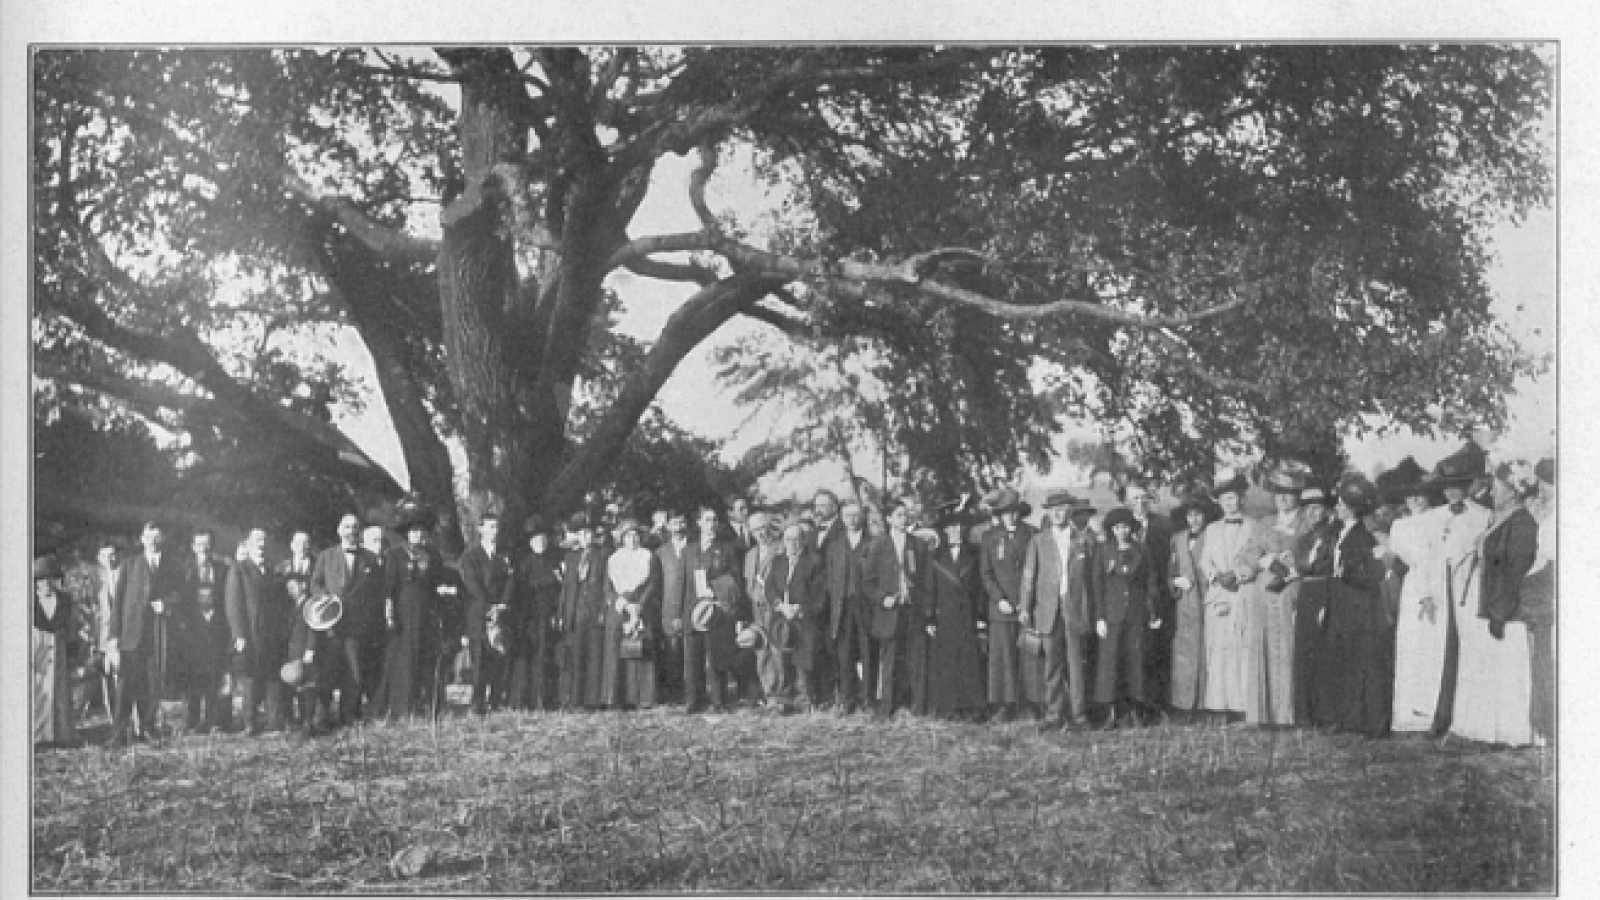 Society of American Indians Conference, Image 3